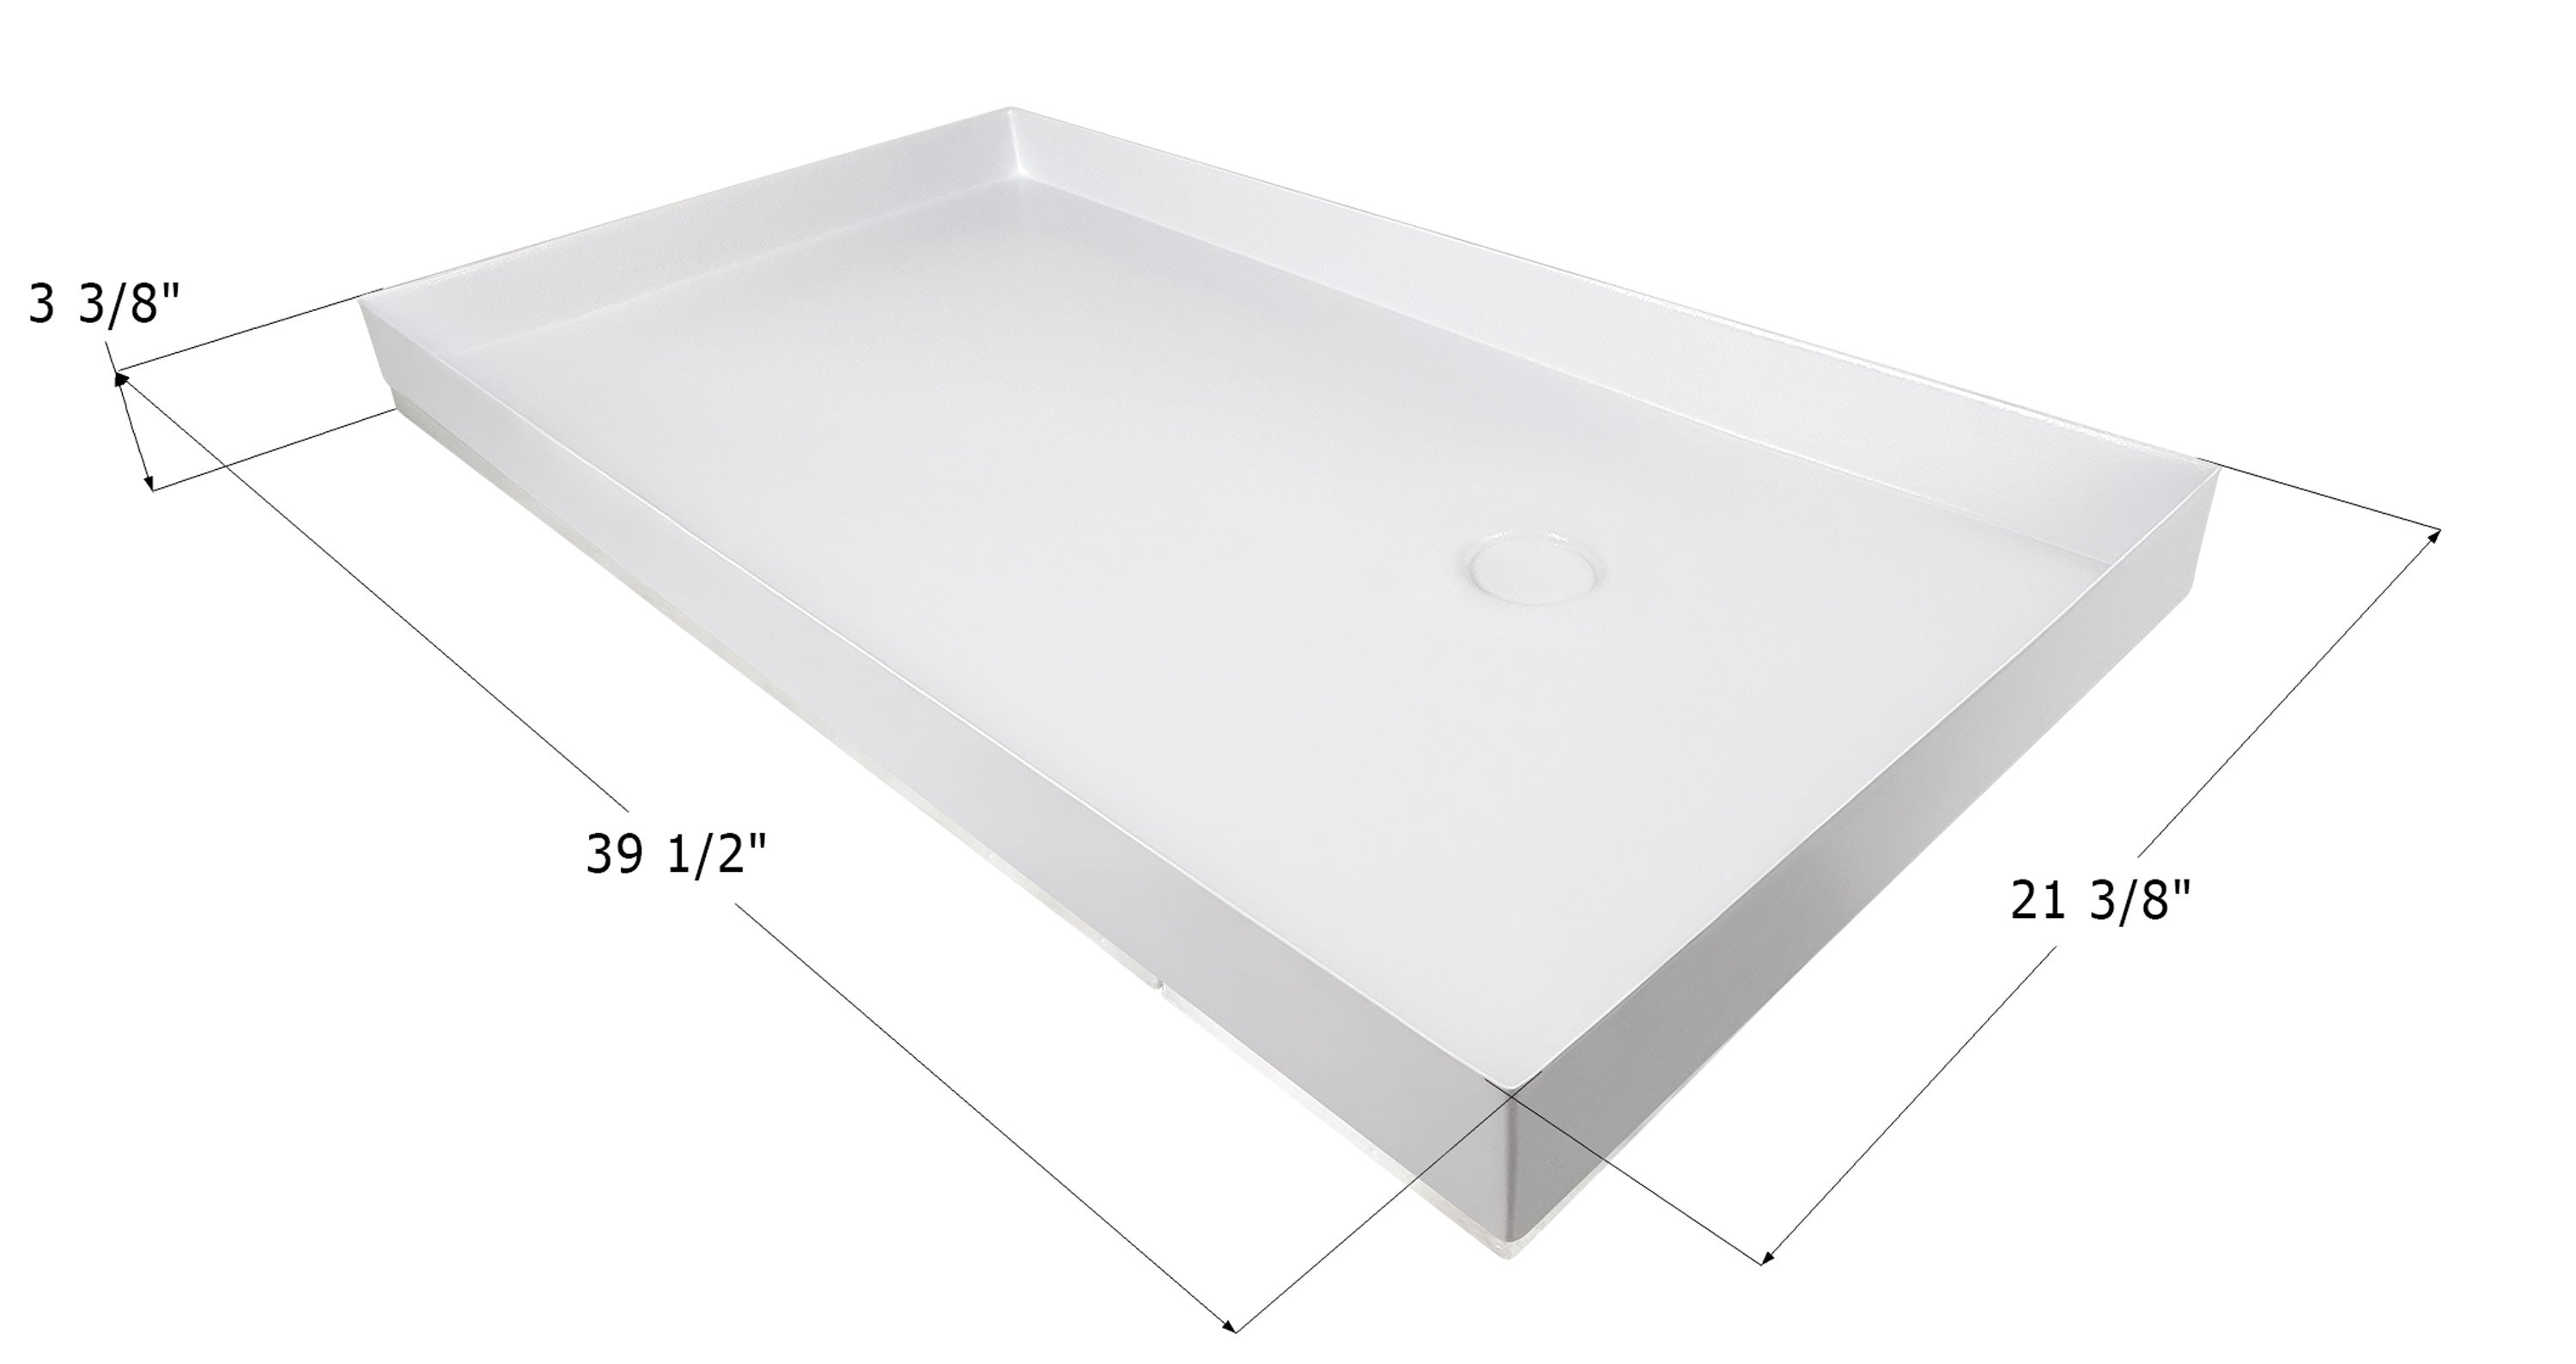 Icon 14069 Shower Pan SP500 - 39-1/2" x 21-3/8" x 3-3/8"